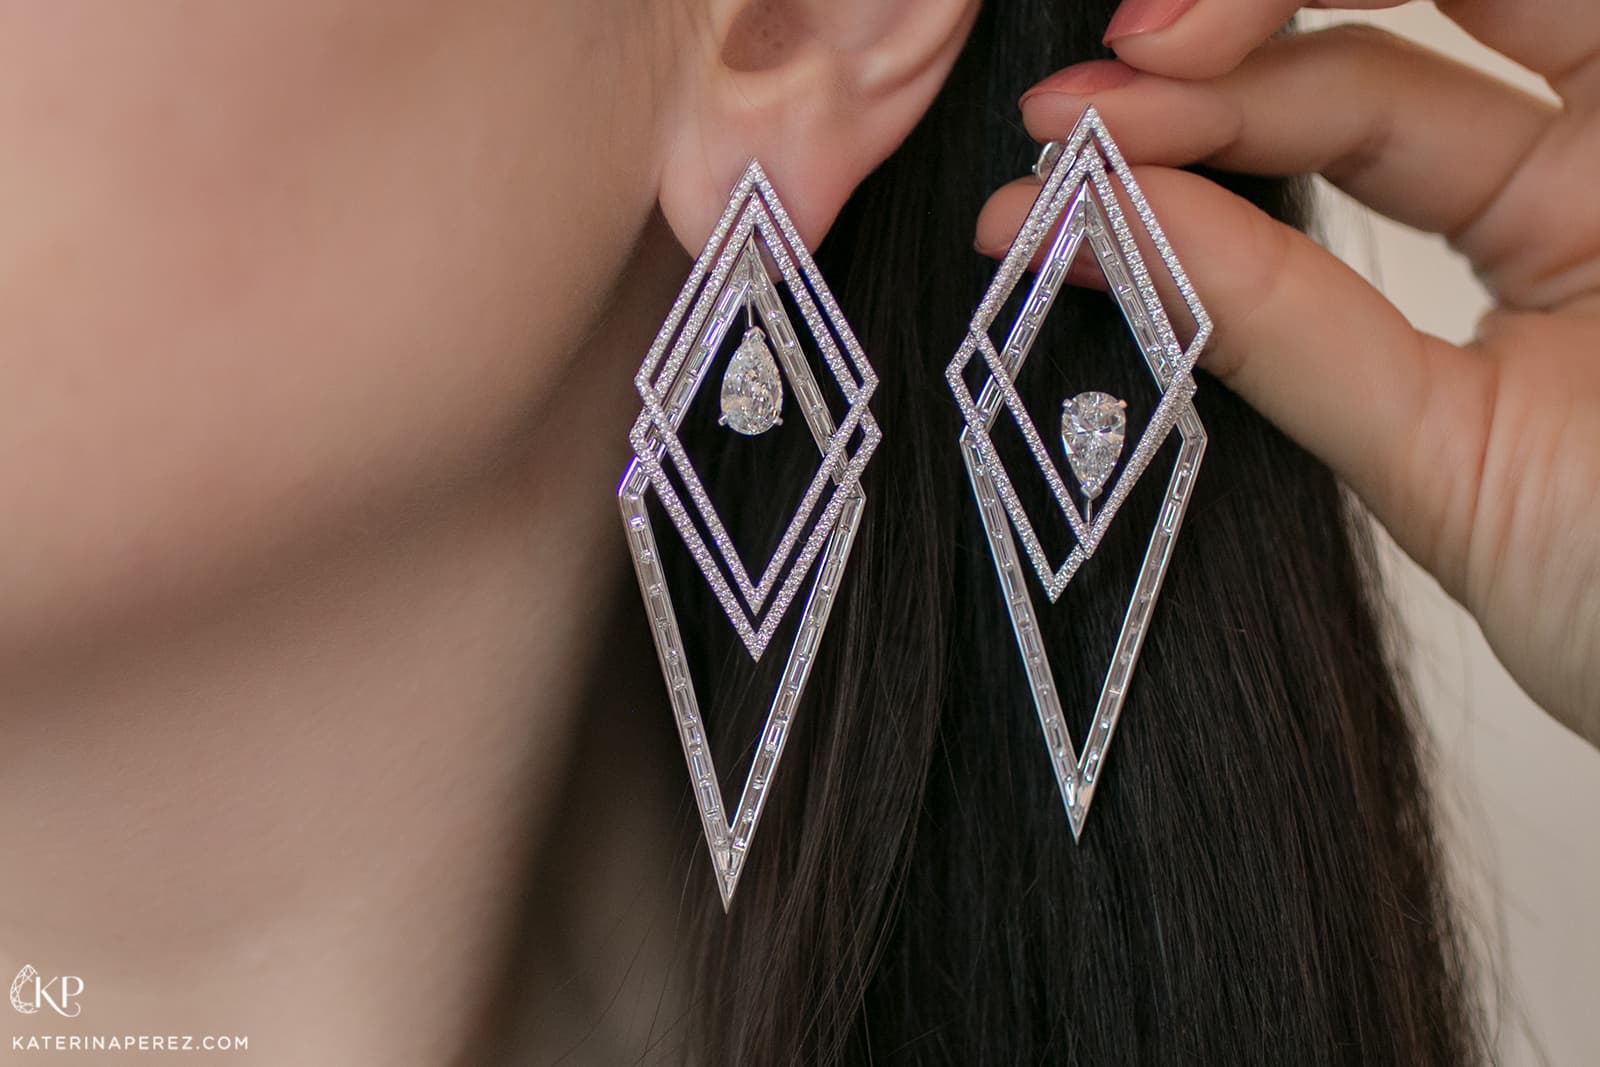 Messika Voltige Trapézistes high jewellery diamond earrings. The geometric lines overlap and intertwine, displaying mesmerising movement